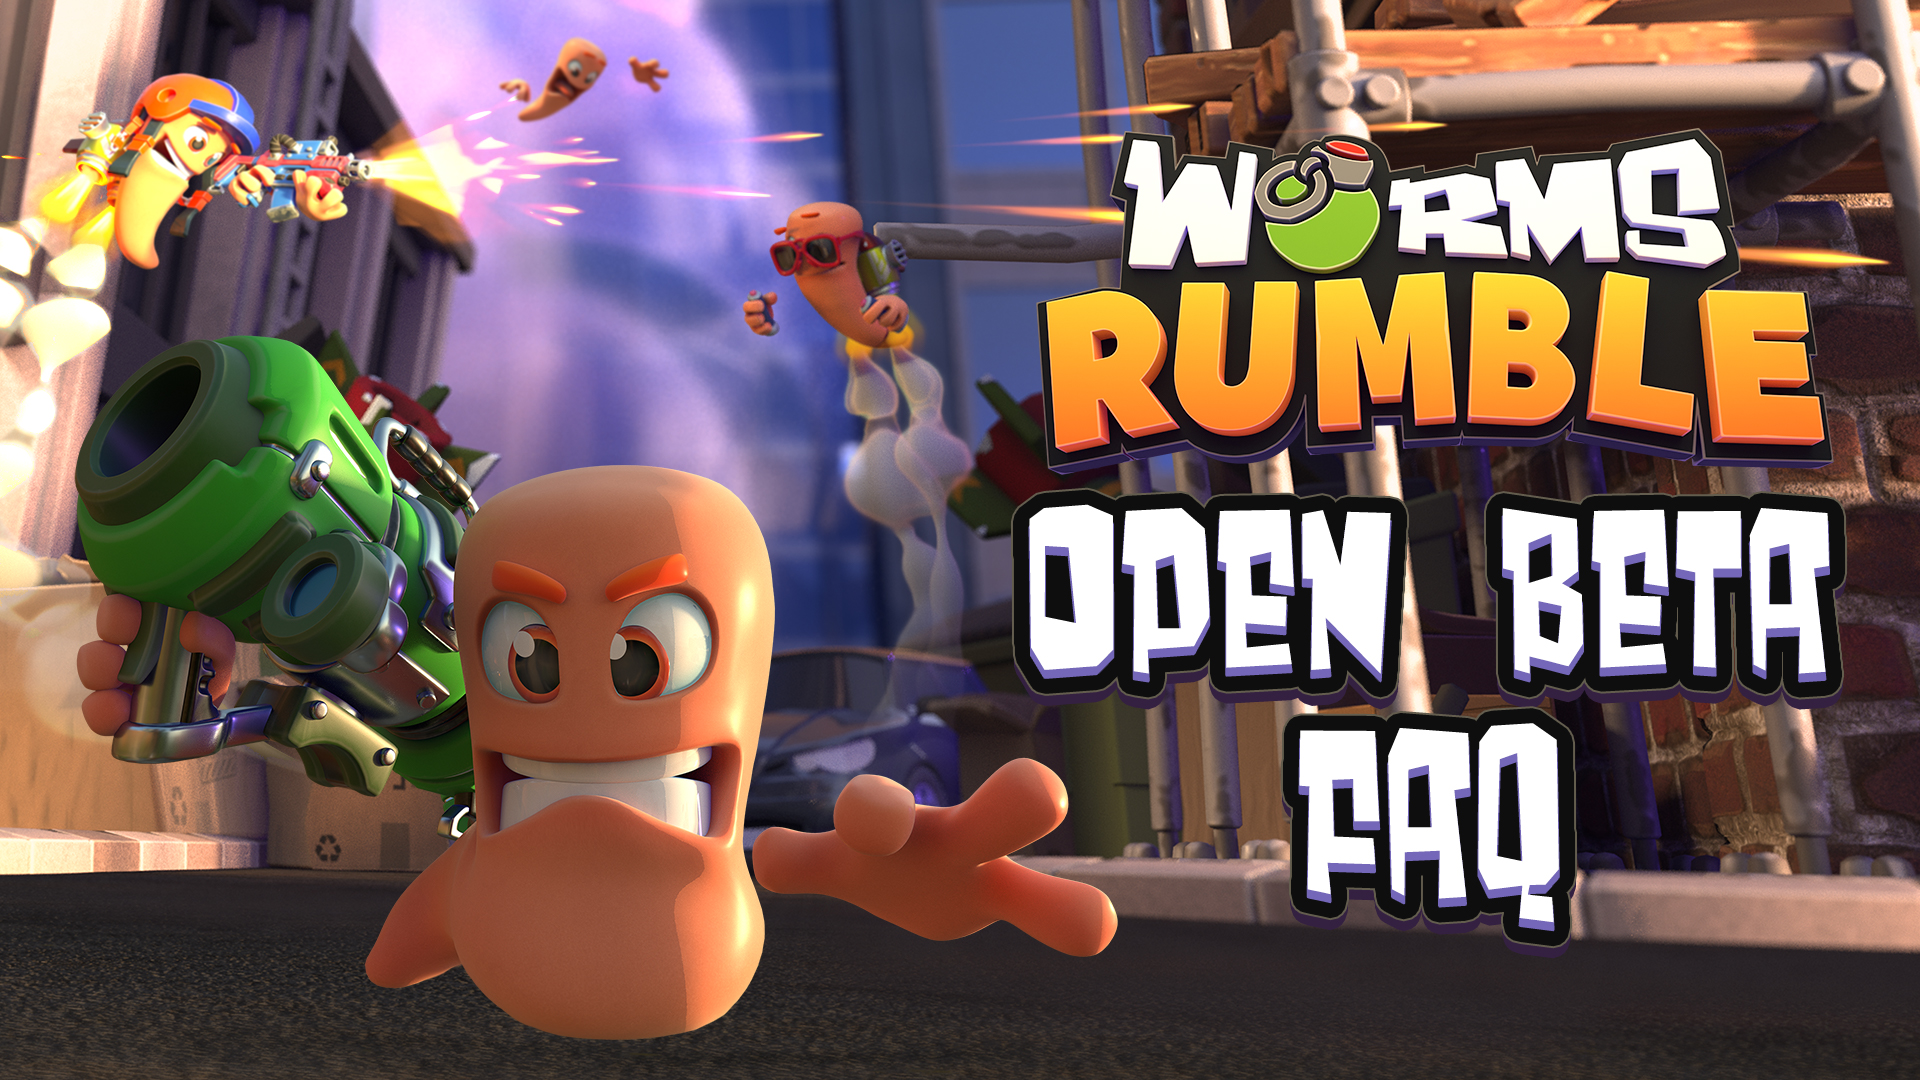 Worms ps4. Worms Rumble ps4. Worms Rumble. Worms Rumble all Weapons.